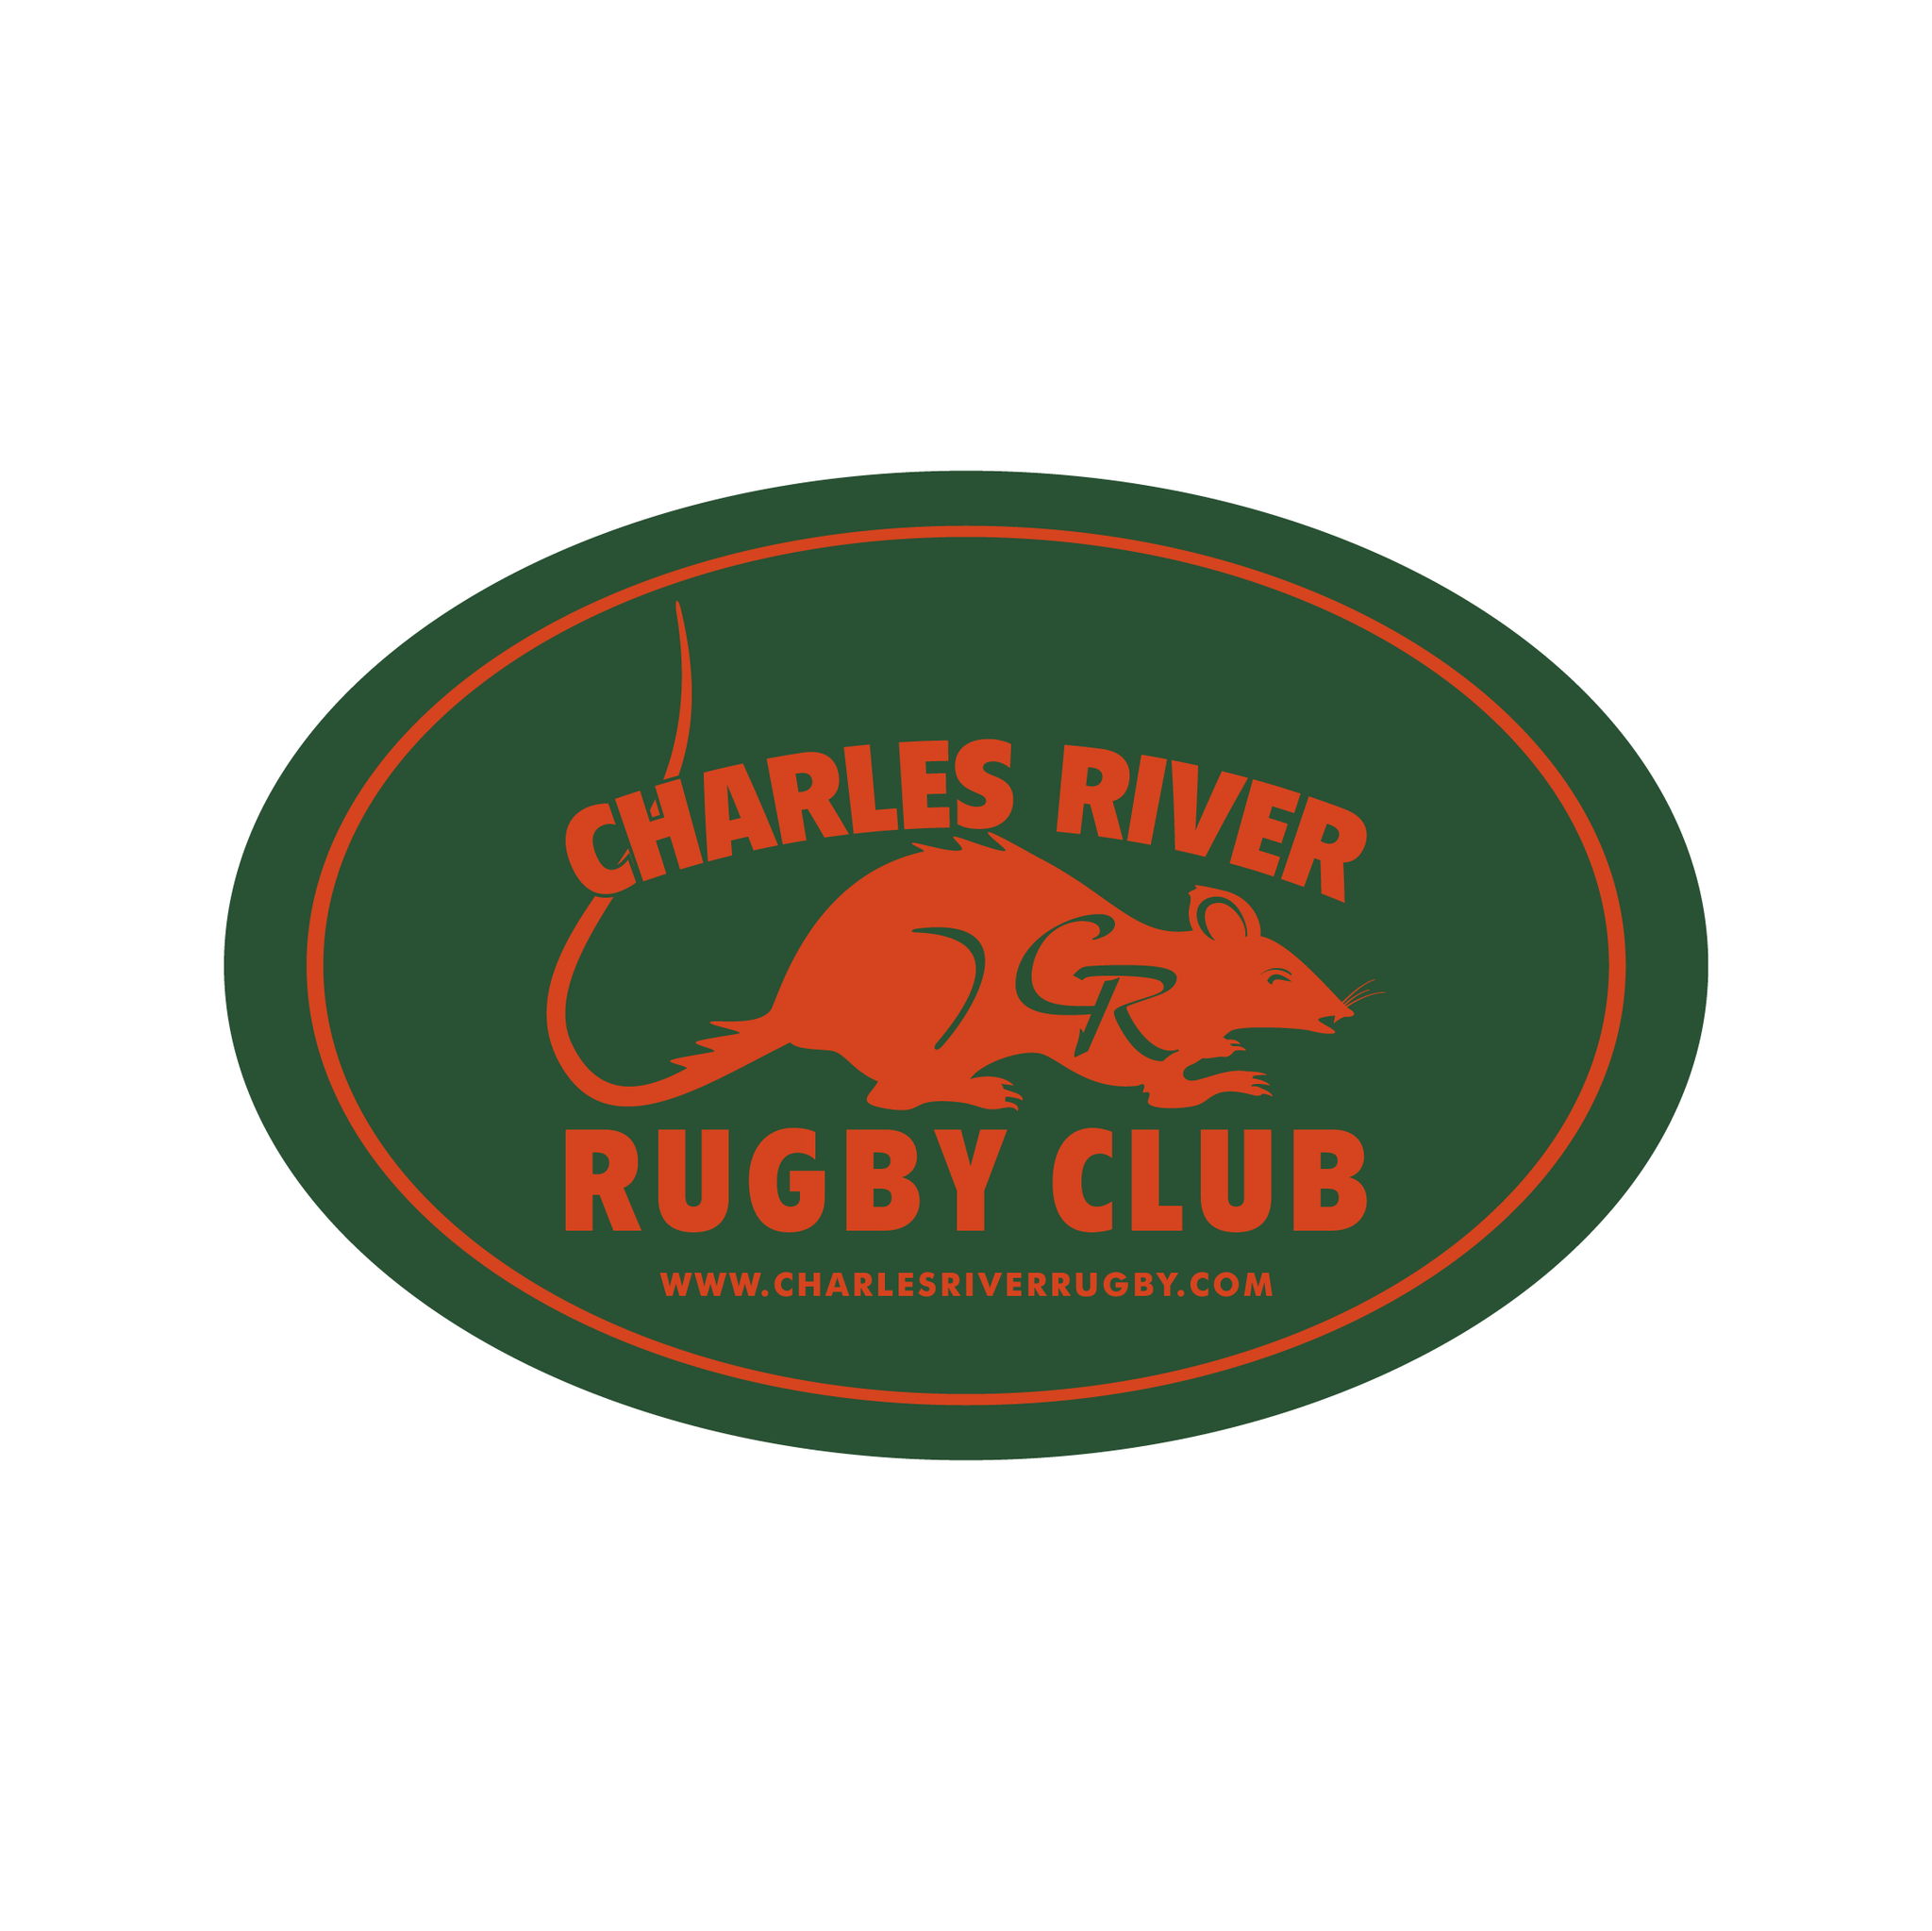 Charles River Oval Decal (STOCK)